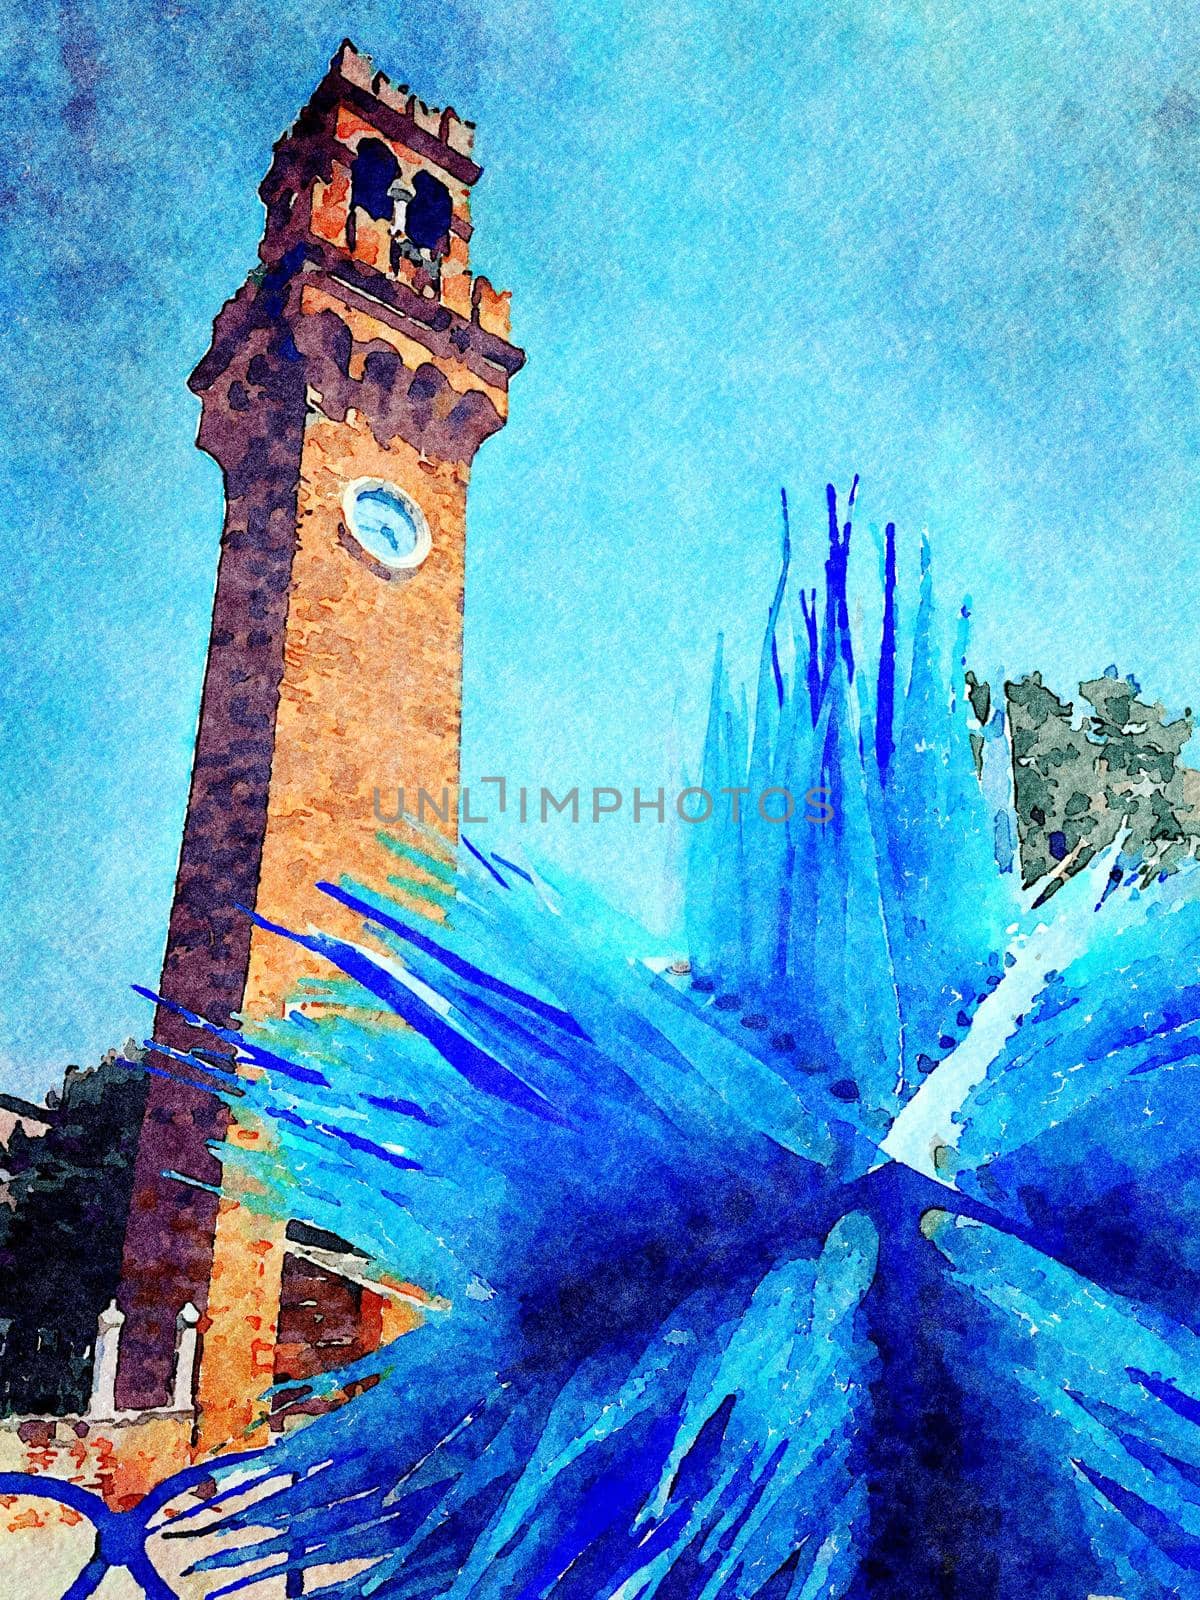 Watercolor representing one of the towers and a blue sculpture in one of the squares in the historic center of Venice